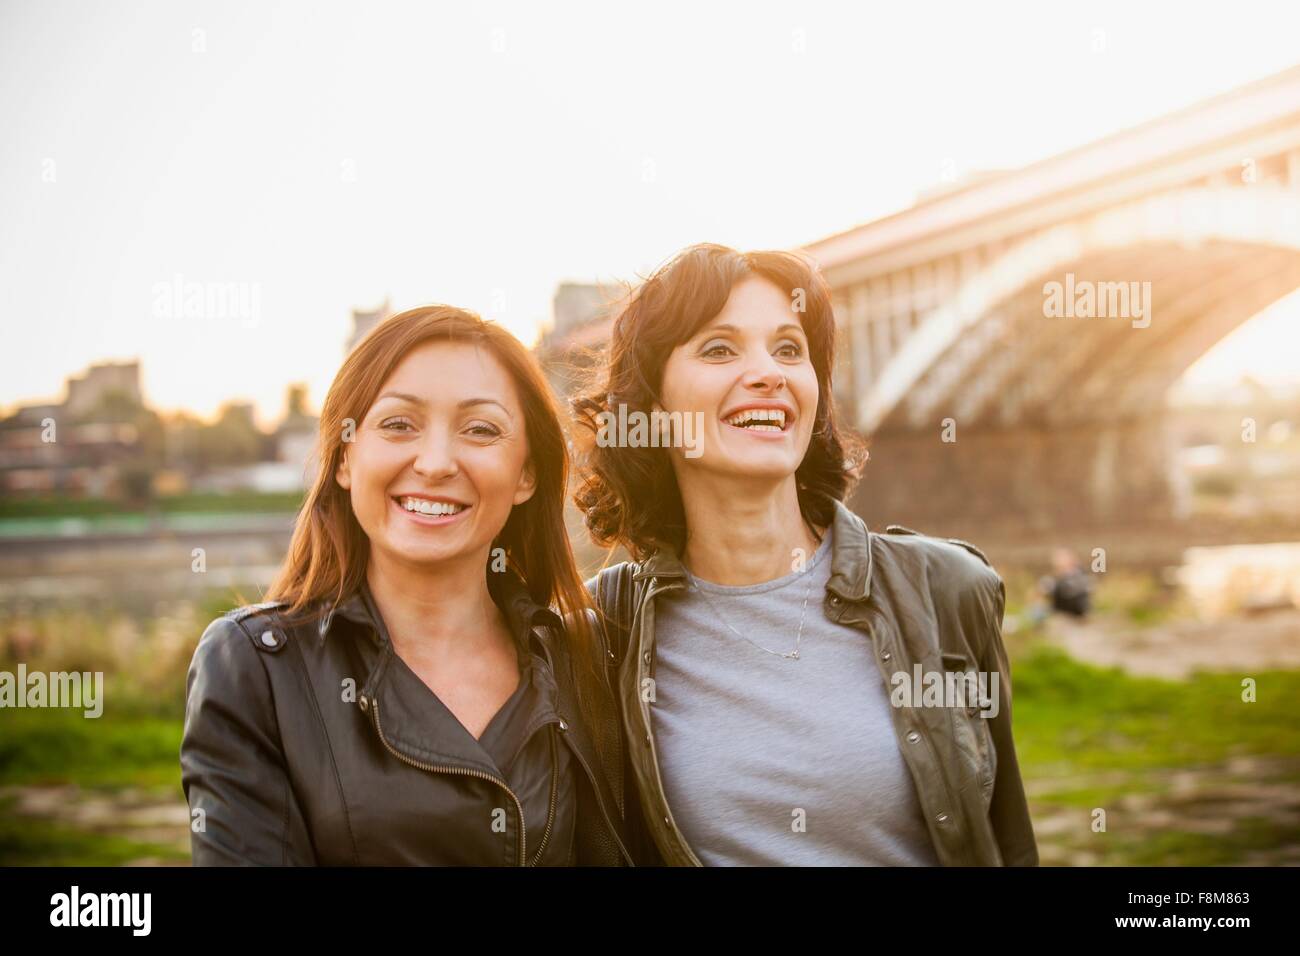 Two mid adult women smiling, portrait Stock Photo